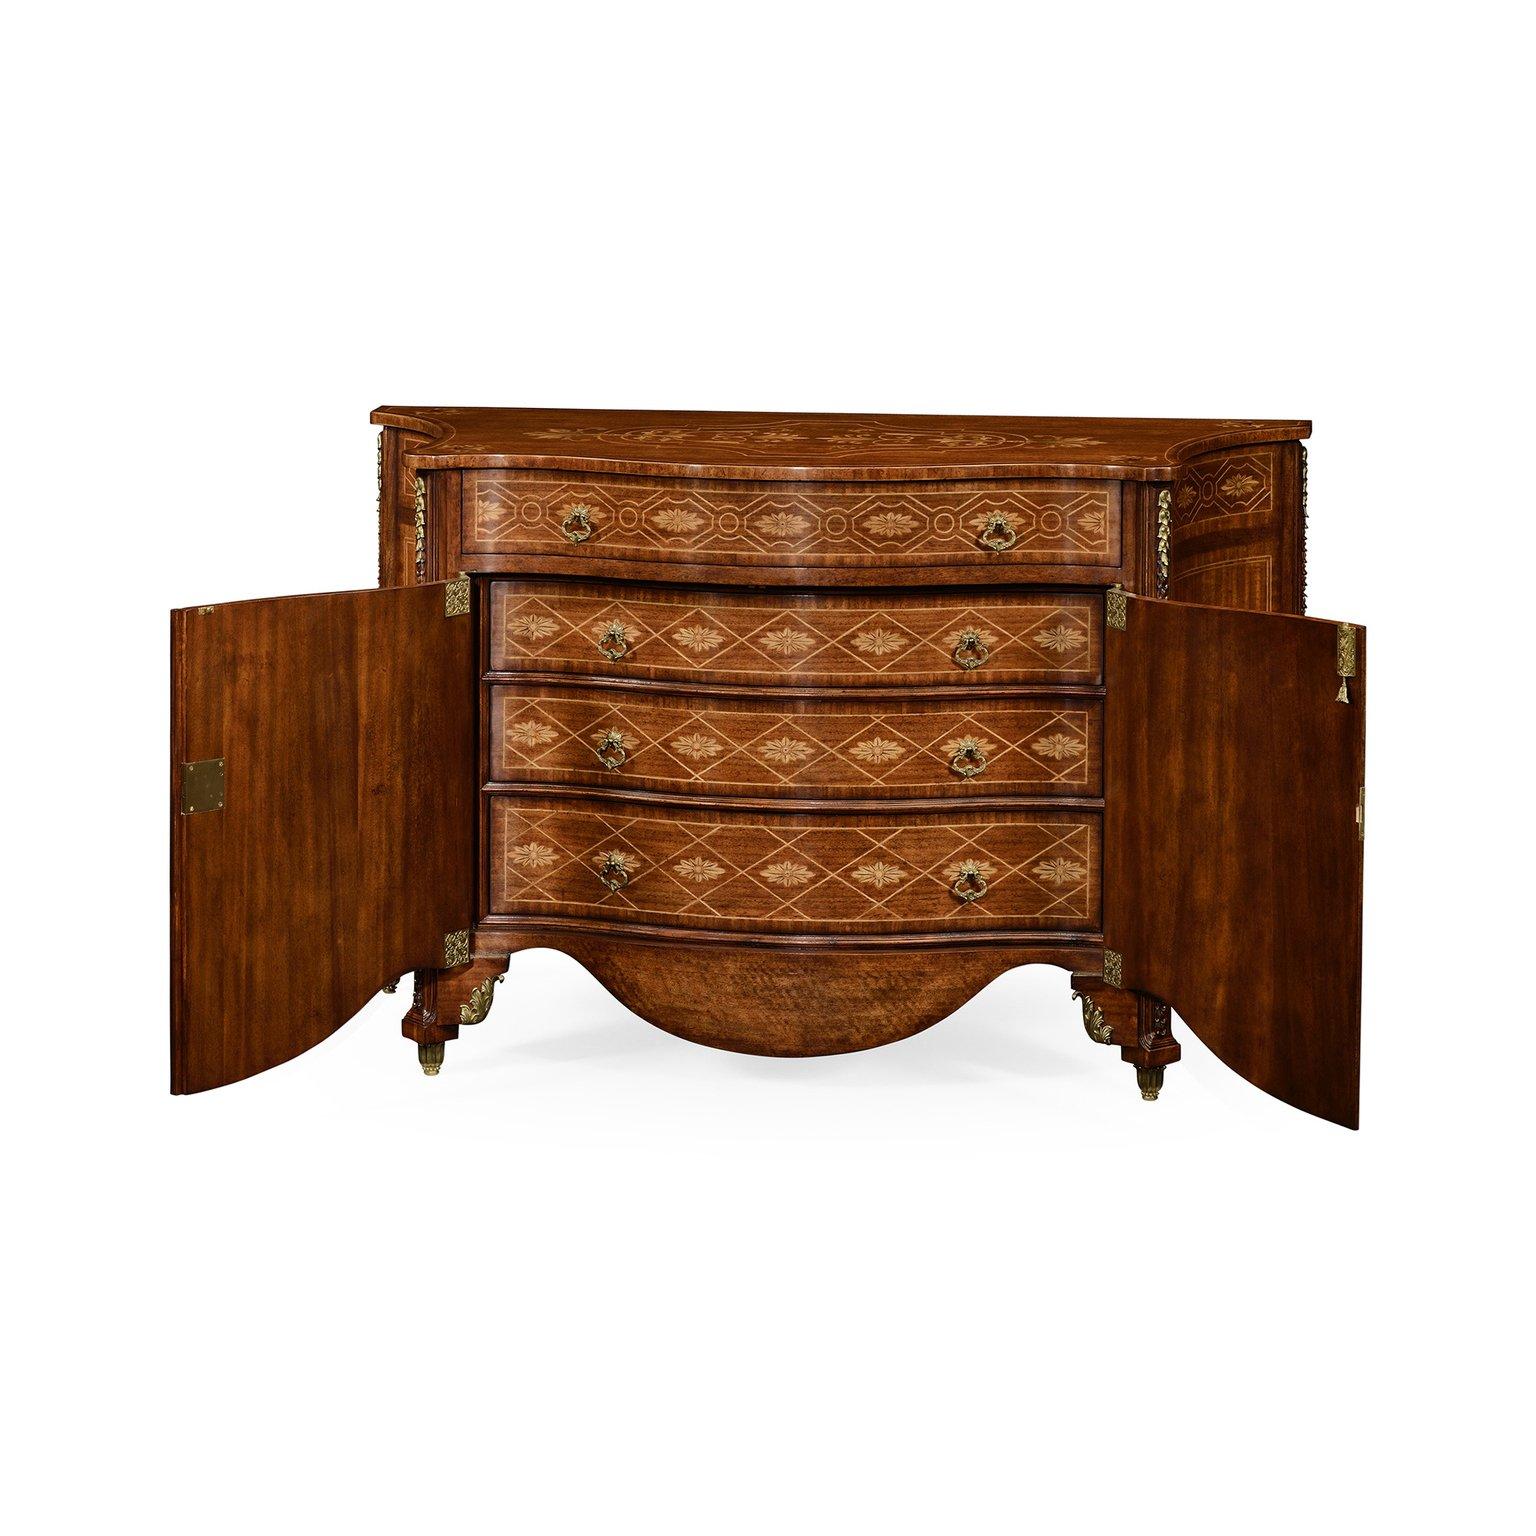 Vietnamese Chippendale Style Inlaid Chest of Drawers For Sale